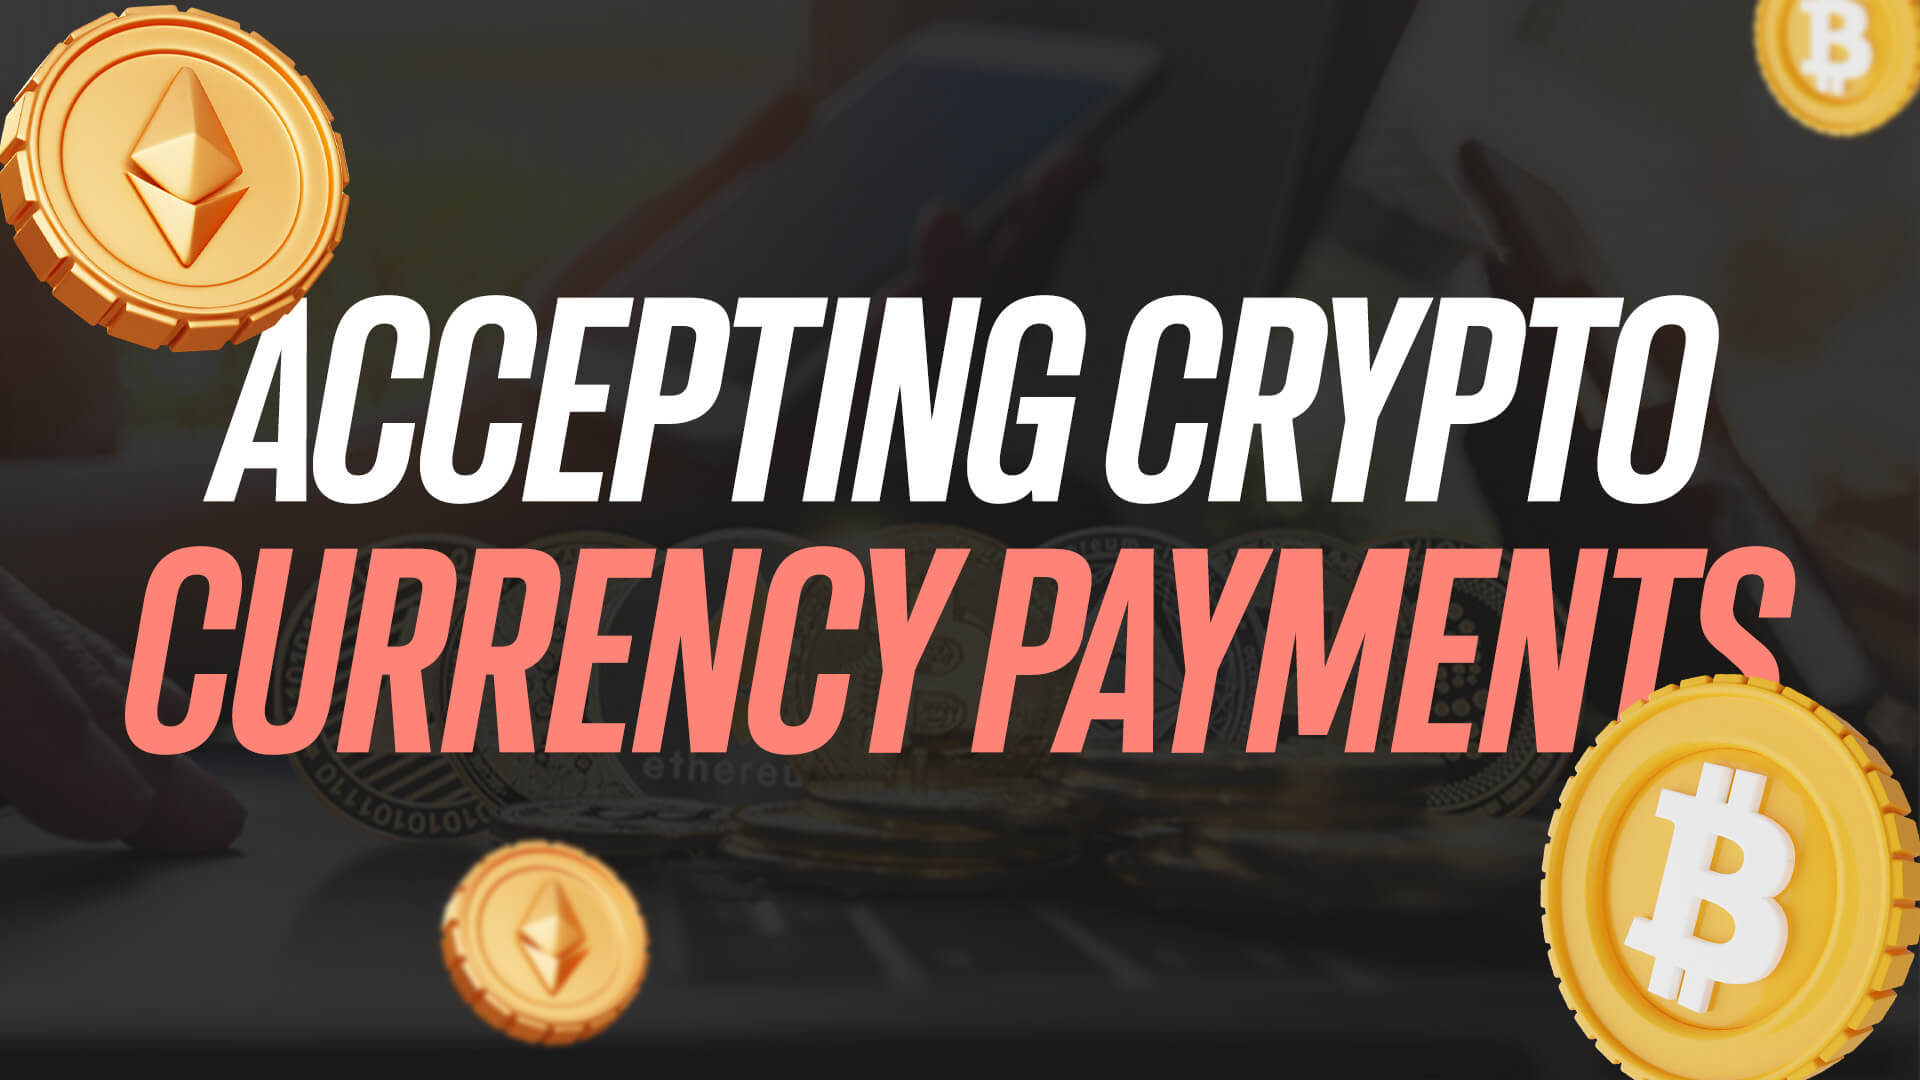 Accepting Crypto Currency Payments (Like Bitcoin _ Ethereum)